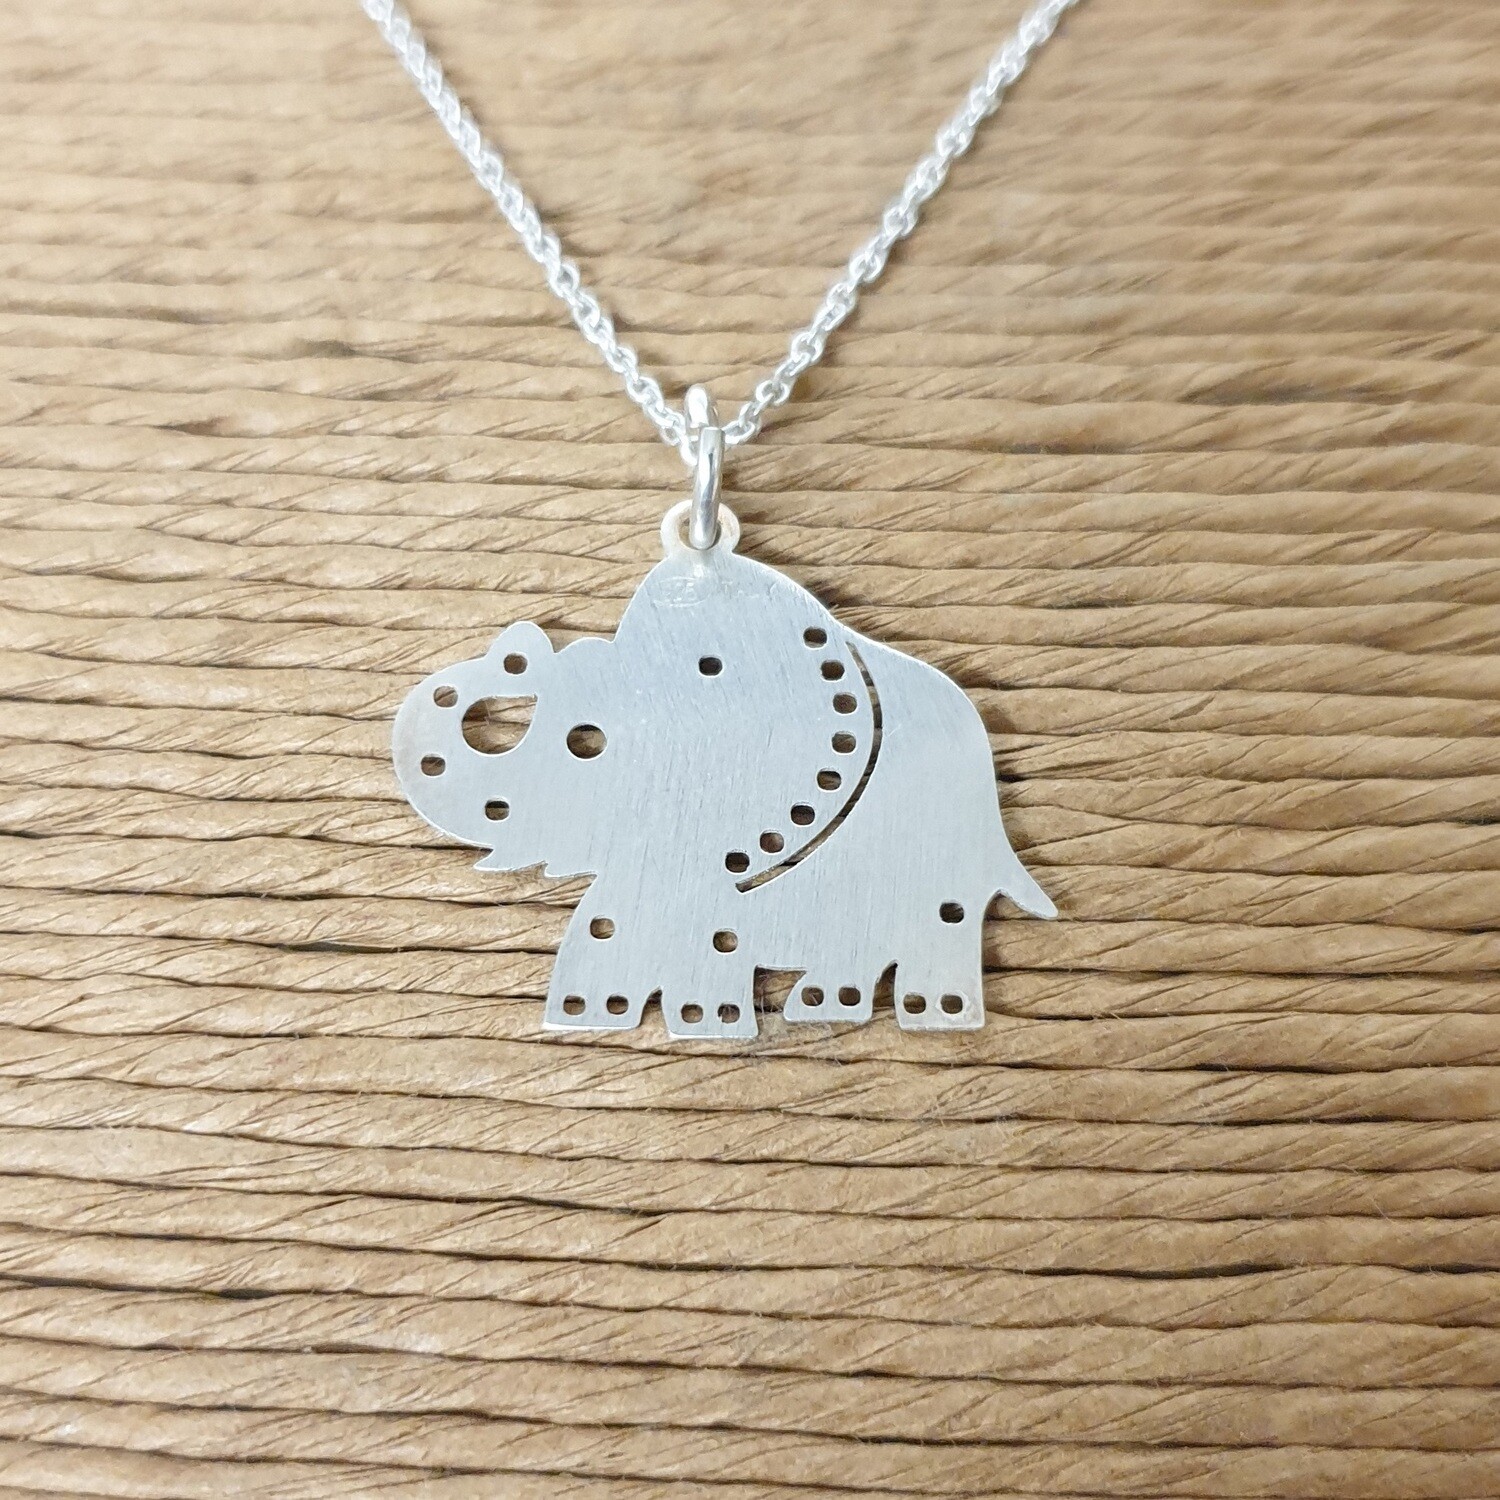 Indian Elephant pendant and necklace